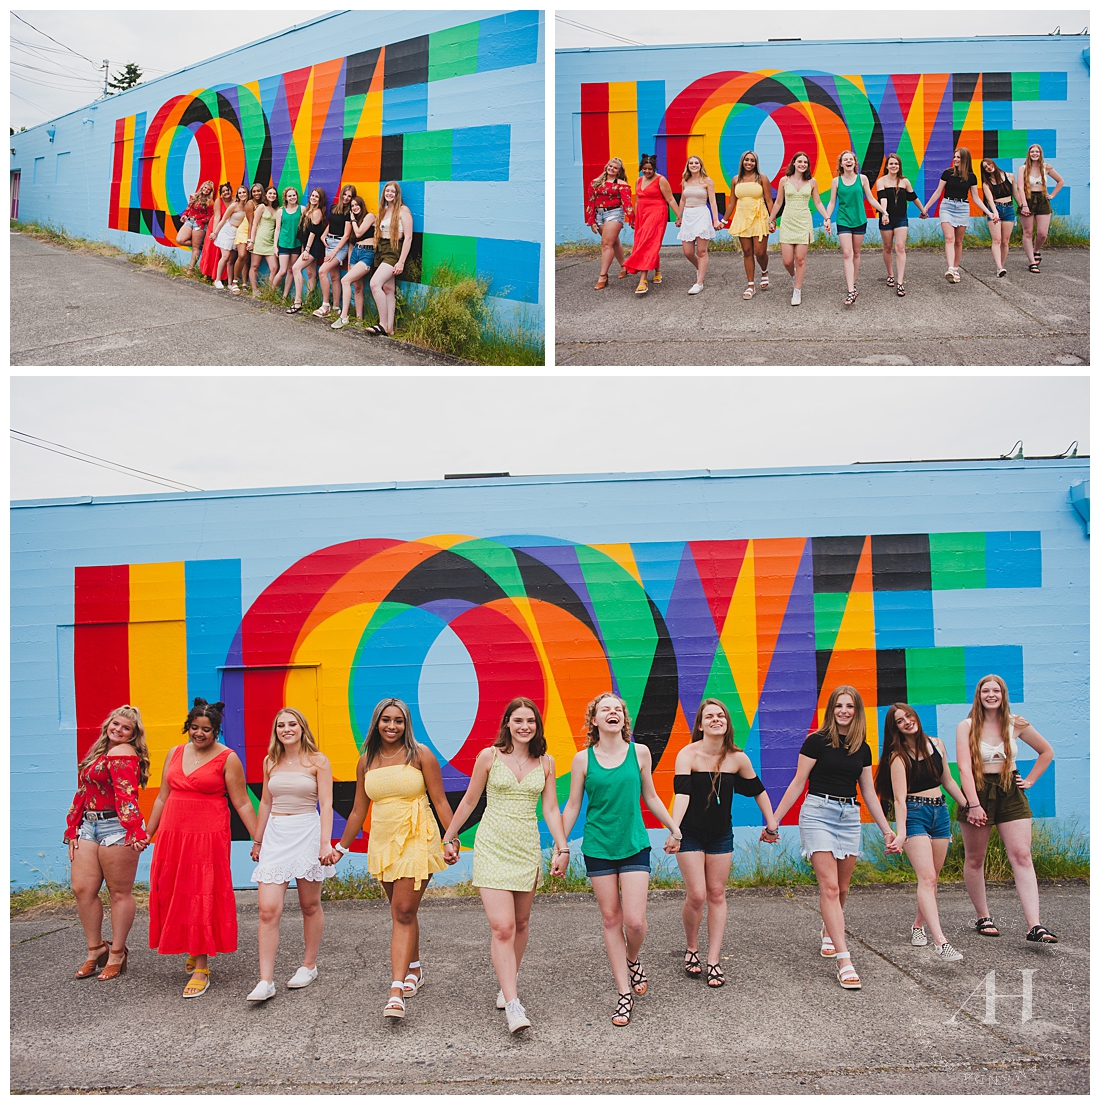 The best senior portraits in front of Tacoma wall mural with bright outfit inspiration photographed by senior photographer Amanda Howse